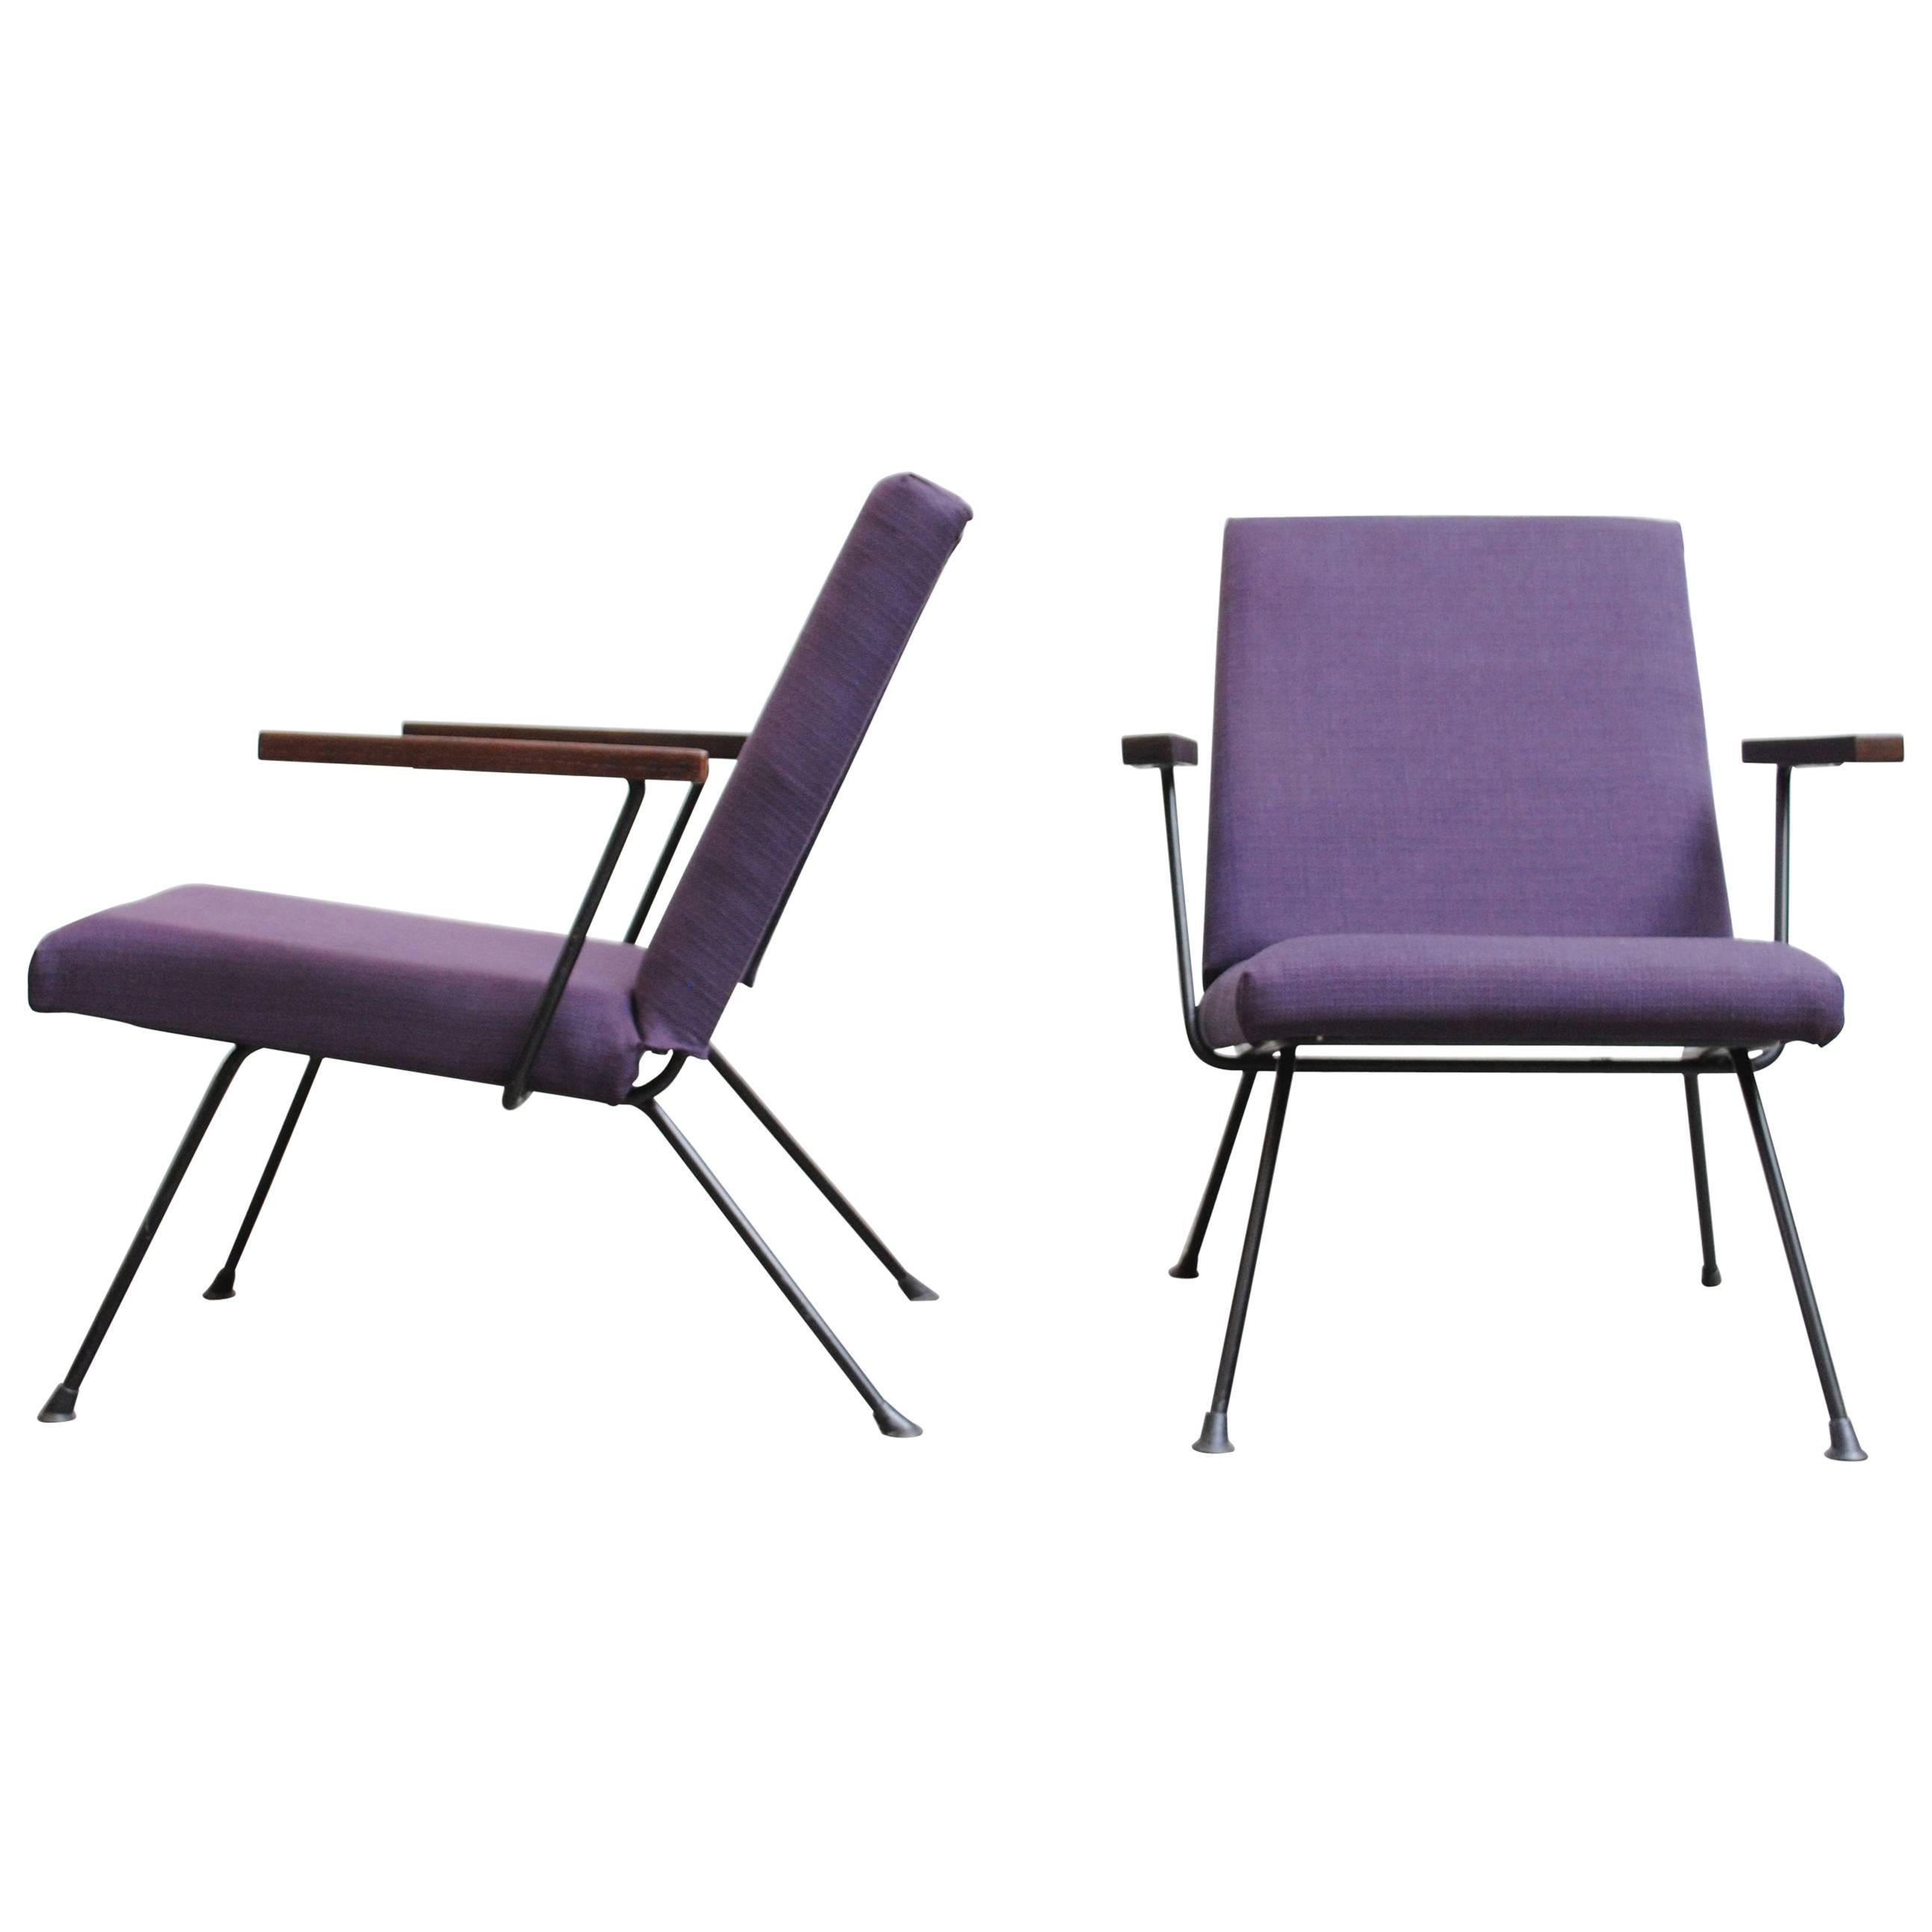 Pair of Plum Upholstered Gispen 1409 Lounge Chairs